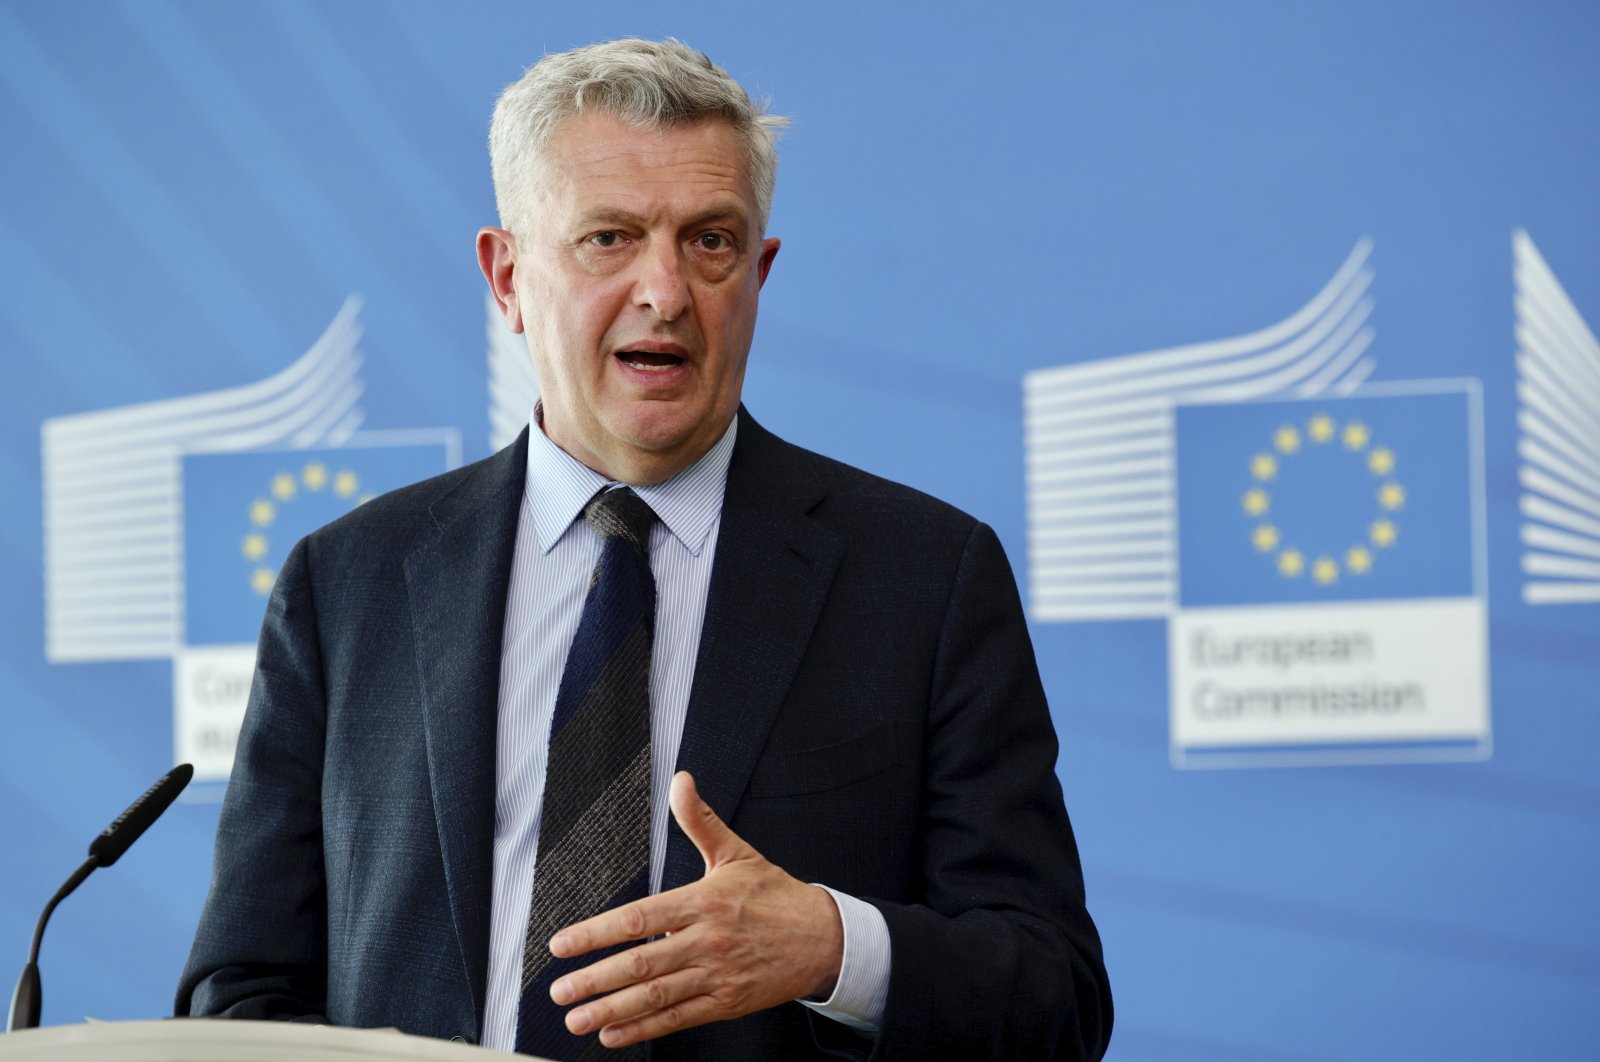 United Nations High Commissioner for Refugees Filippo Grandi speaks during a media conference at European Union headquarters in Brussels, Belgium, May 10, 2021. (Olivier Matthys, Pool via AP)